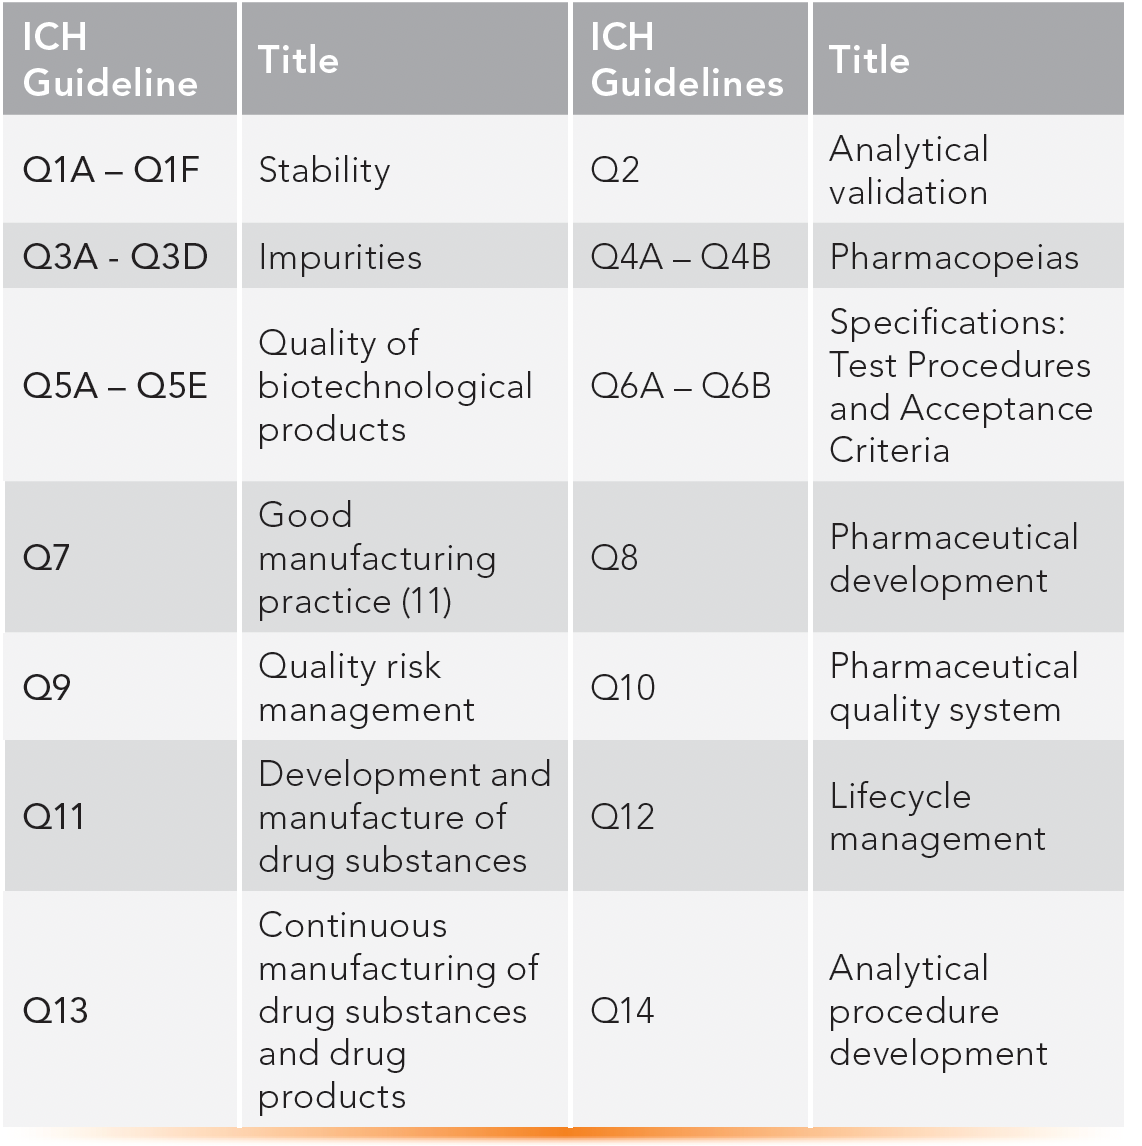 TABLE III: ICH quality guidelines commonly used in drug development and production.